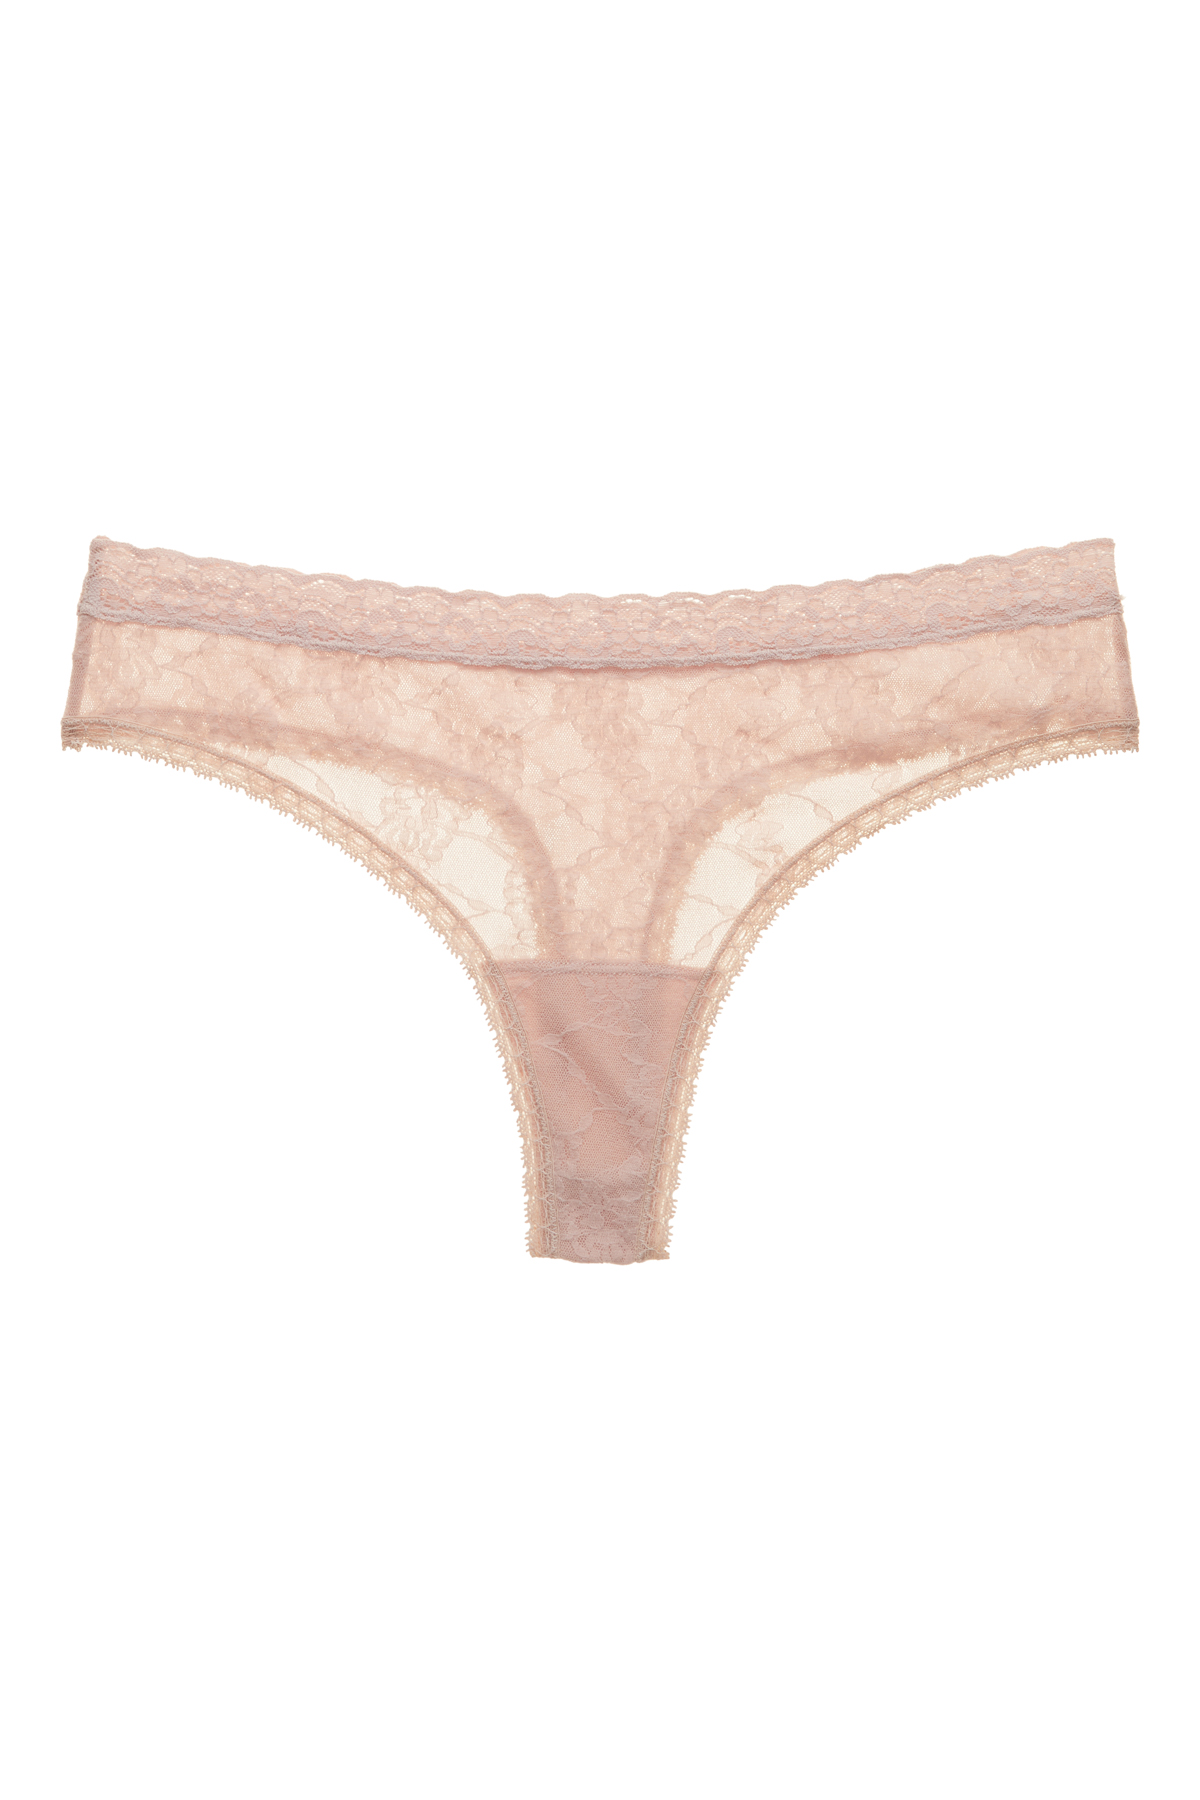 Buy Bliss Allure One-Size Lace Thong Online